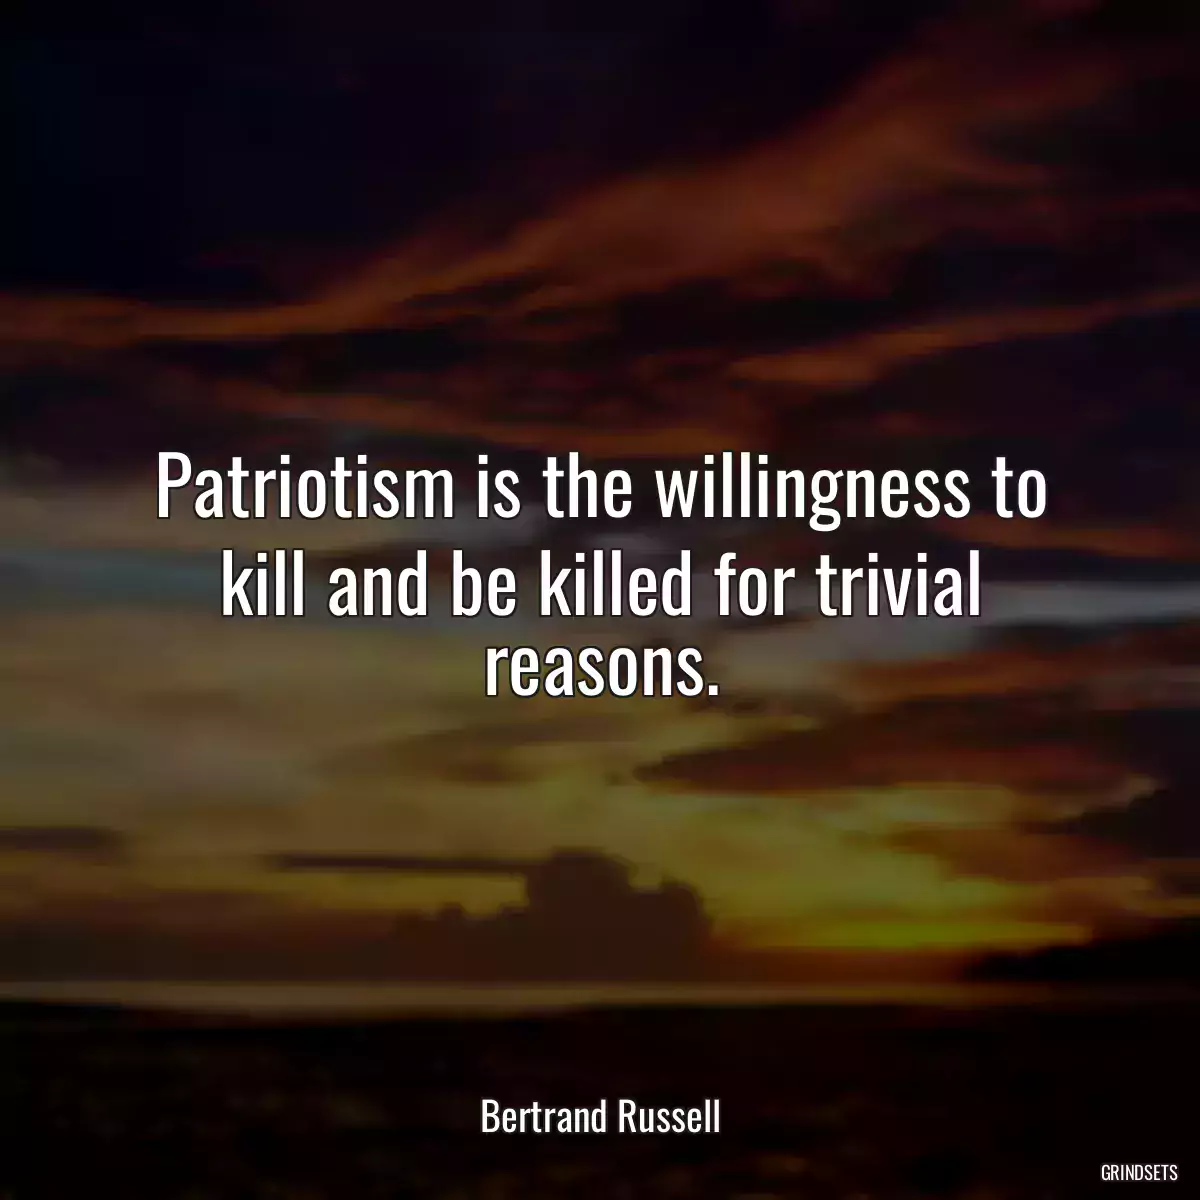 Patriotism is the willingness to kill and be killed for trivial reasons.